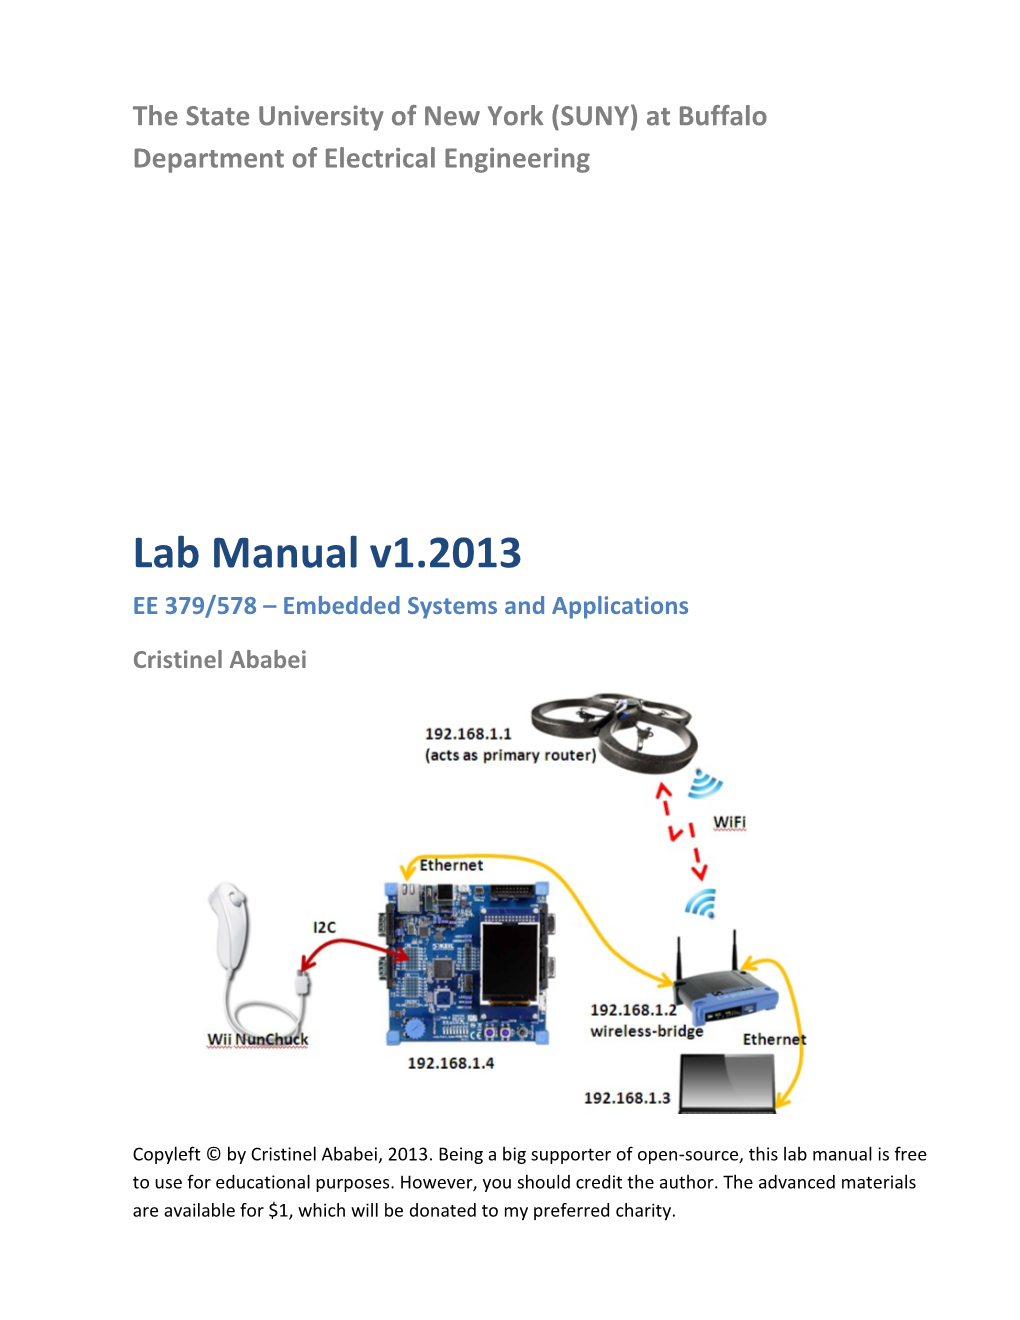 Lab Manual V1.2013 EE 379/578 – Embedded Systems and Applications Cristinel Ababei